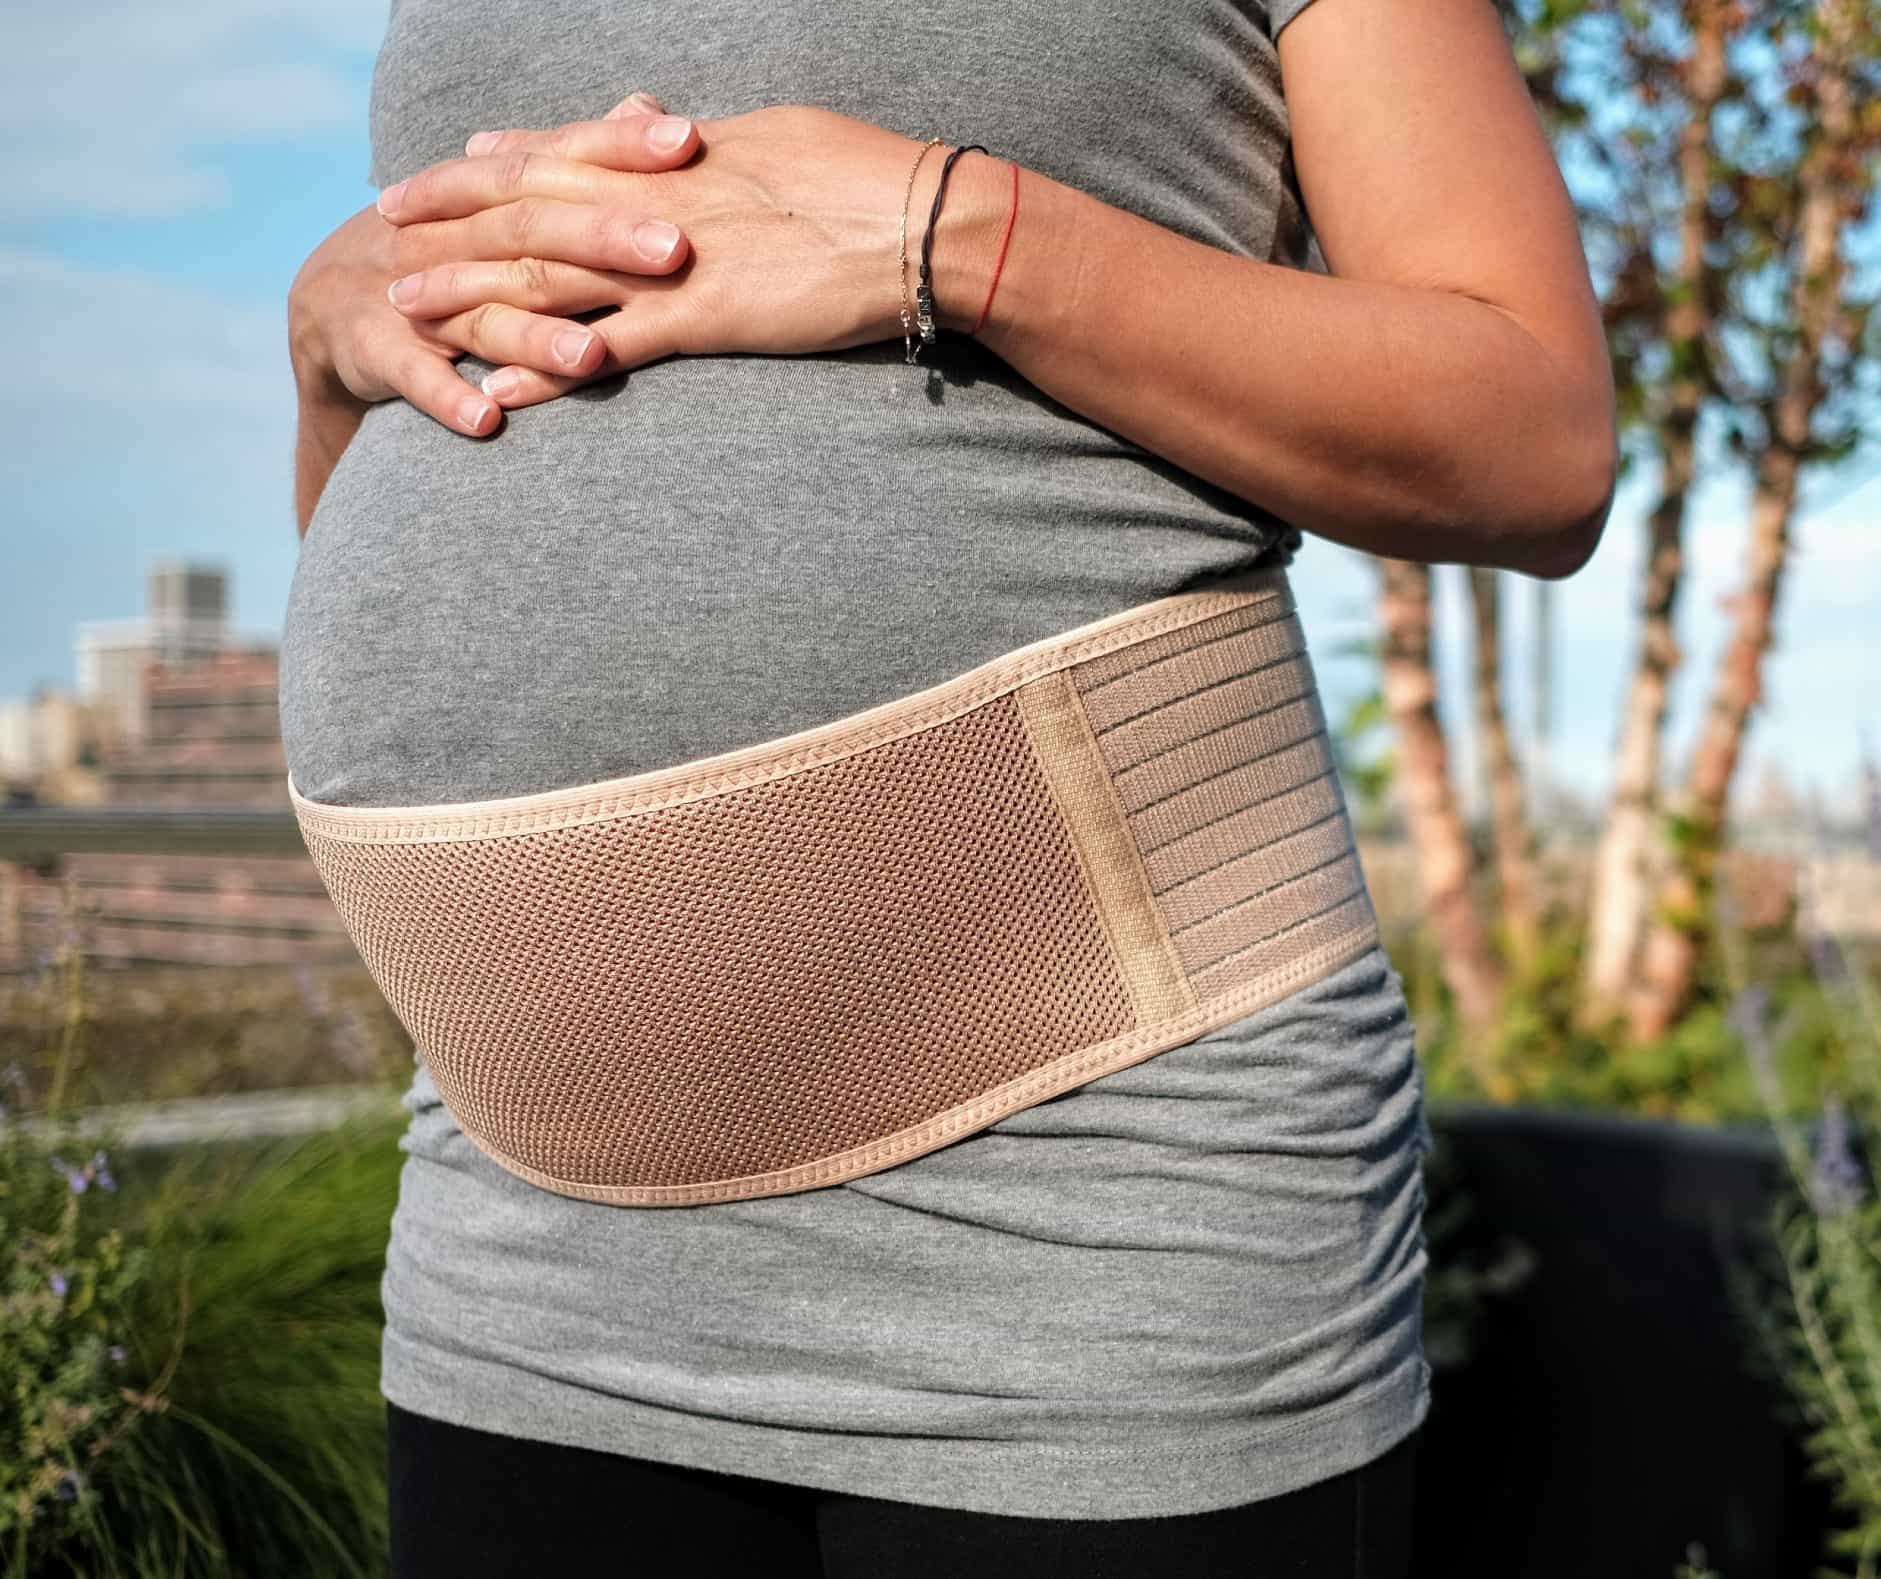 Maternity Belly Band – Pregnancy Support Belt (for All Stages of